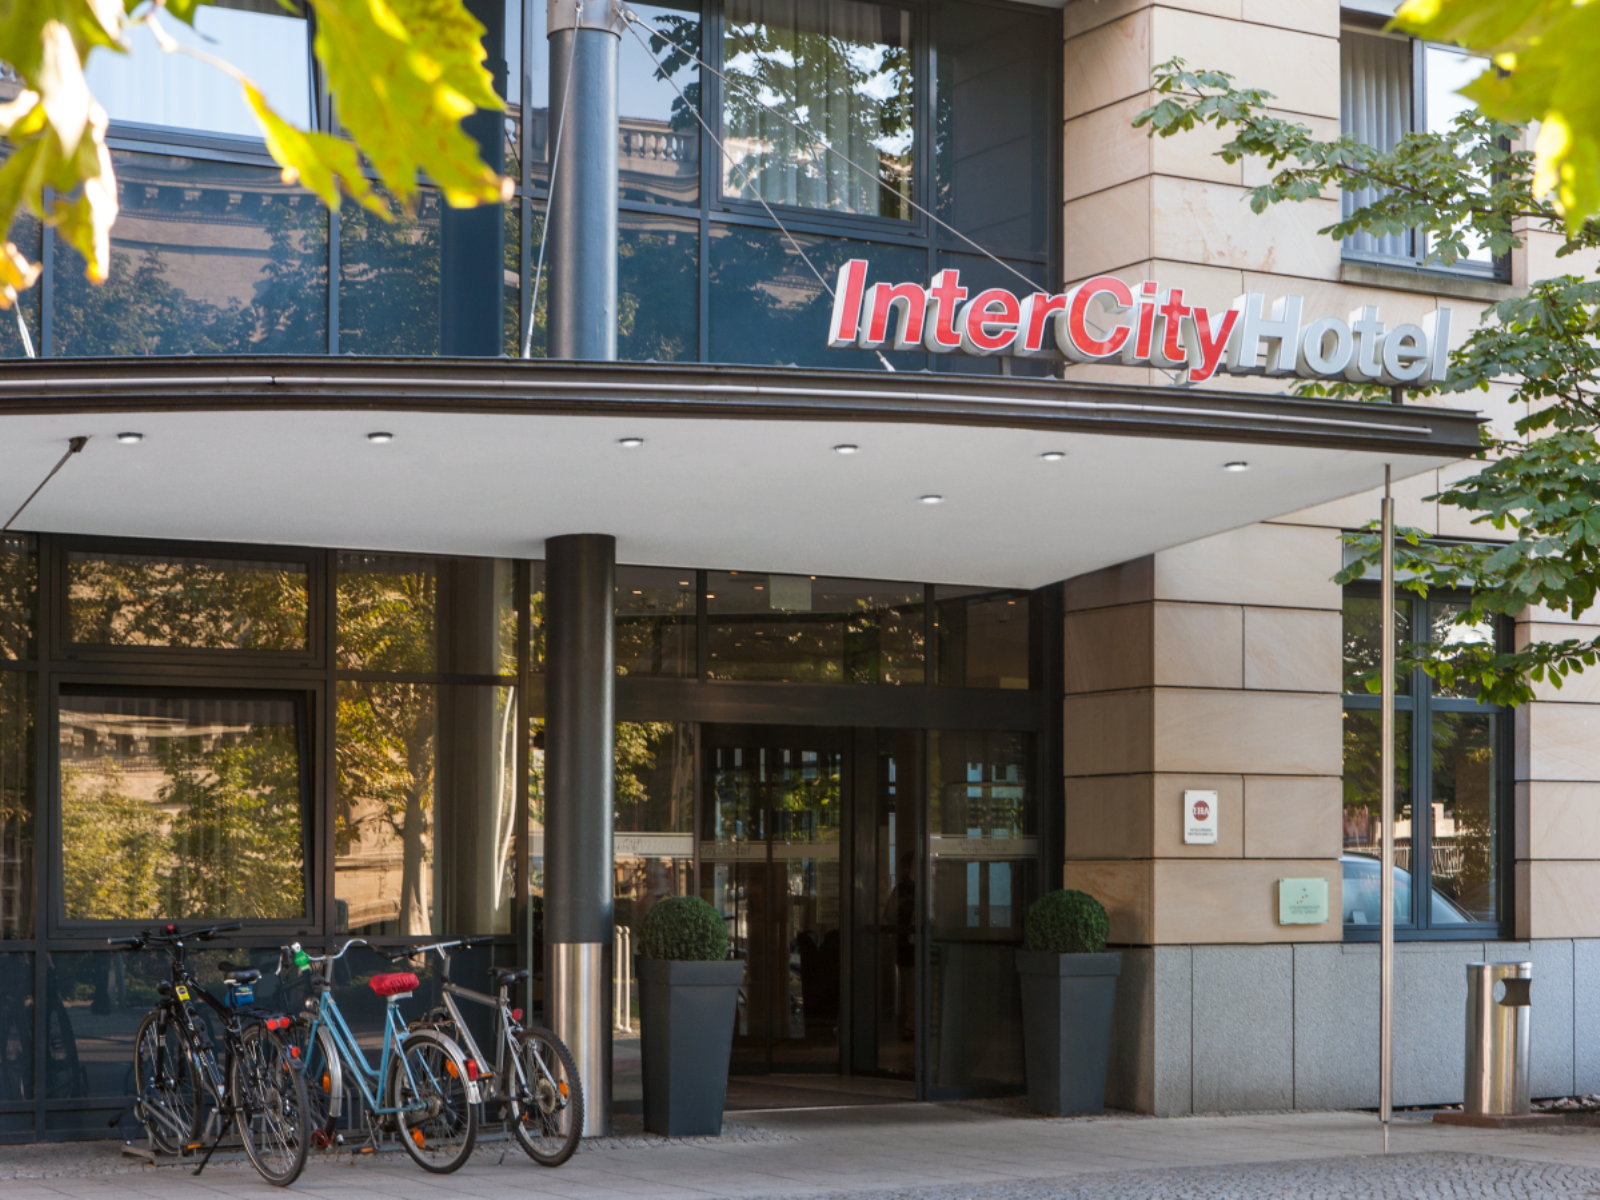 InterCityHotel Magdeburg <br/>68.89 ew <br/> <a href='http://vakantieoplossing.nl/outpage/?id=da72587fe63ee8789d7e7807f0df2027' target='_blank'>View Details</a>